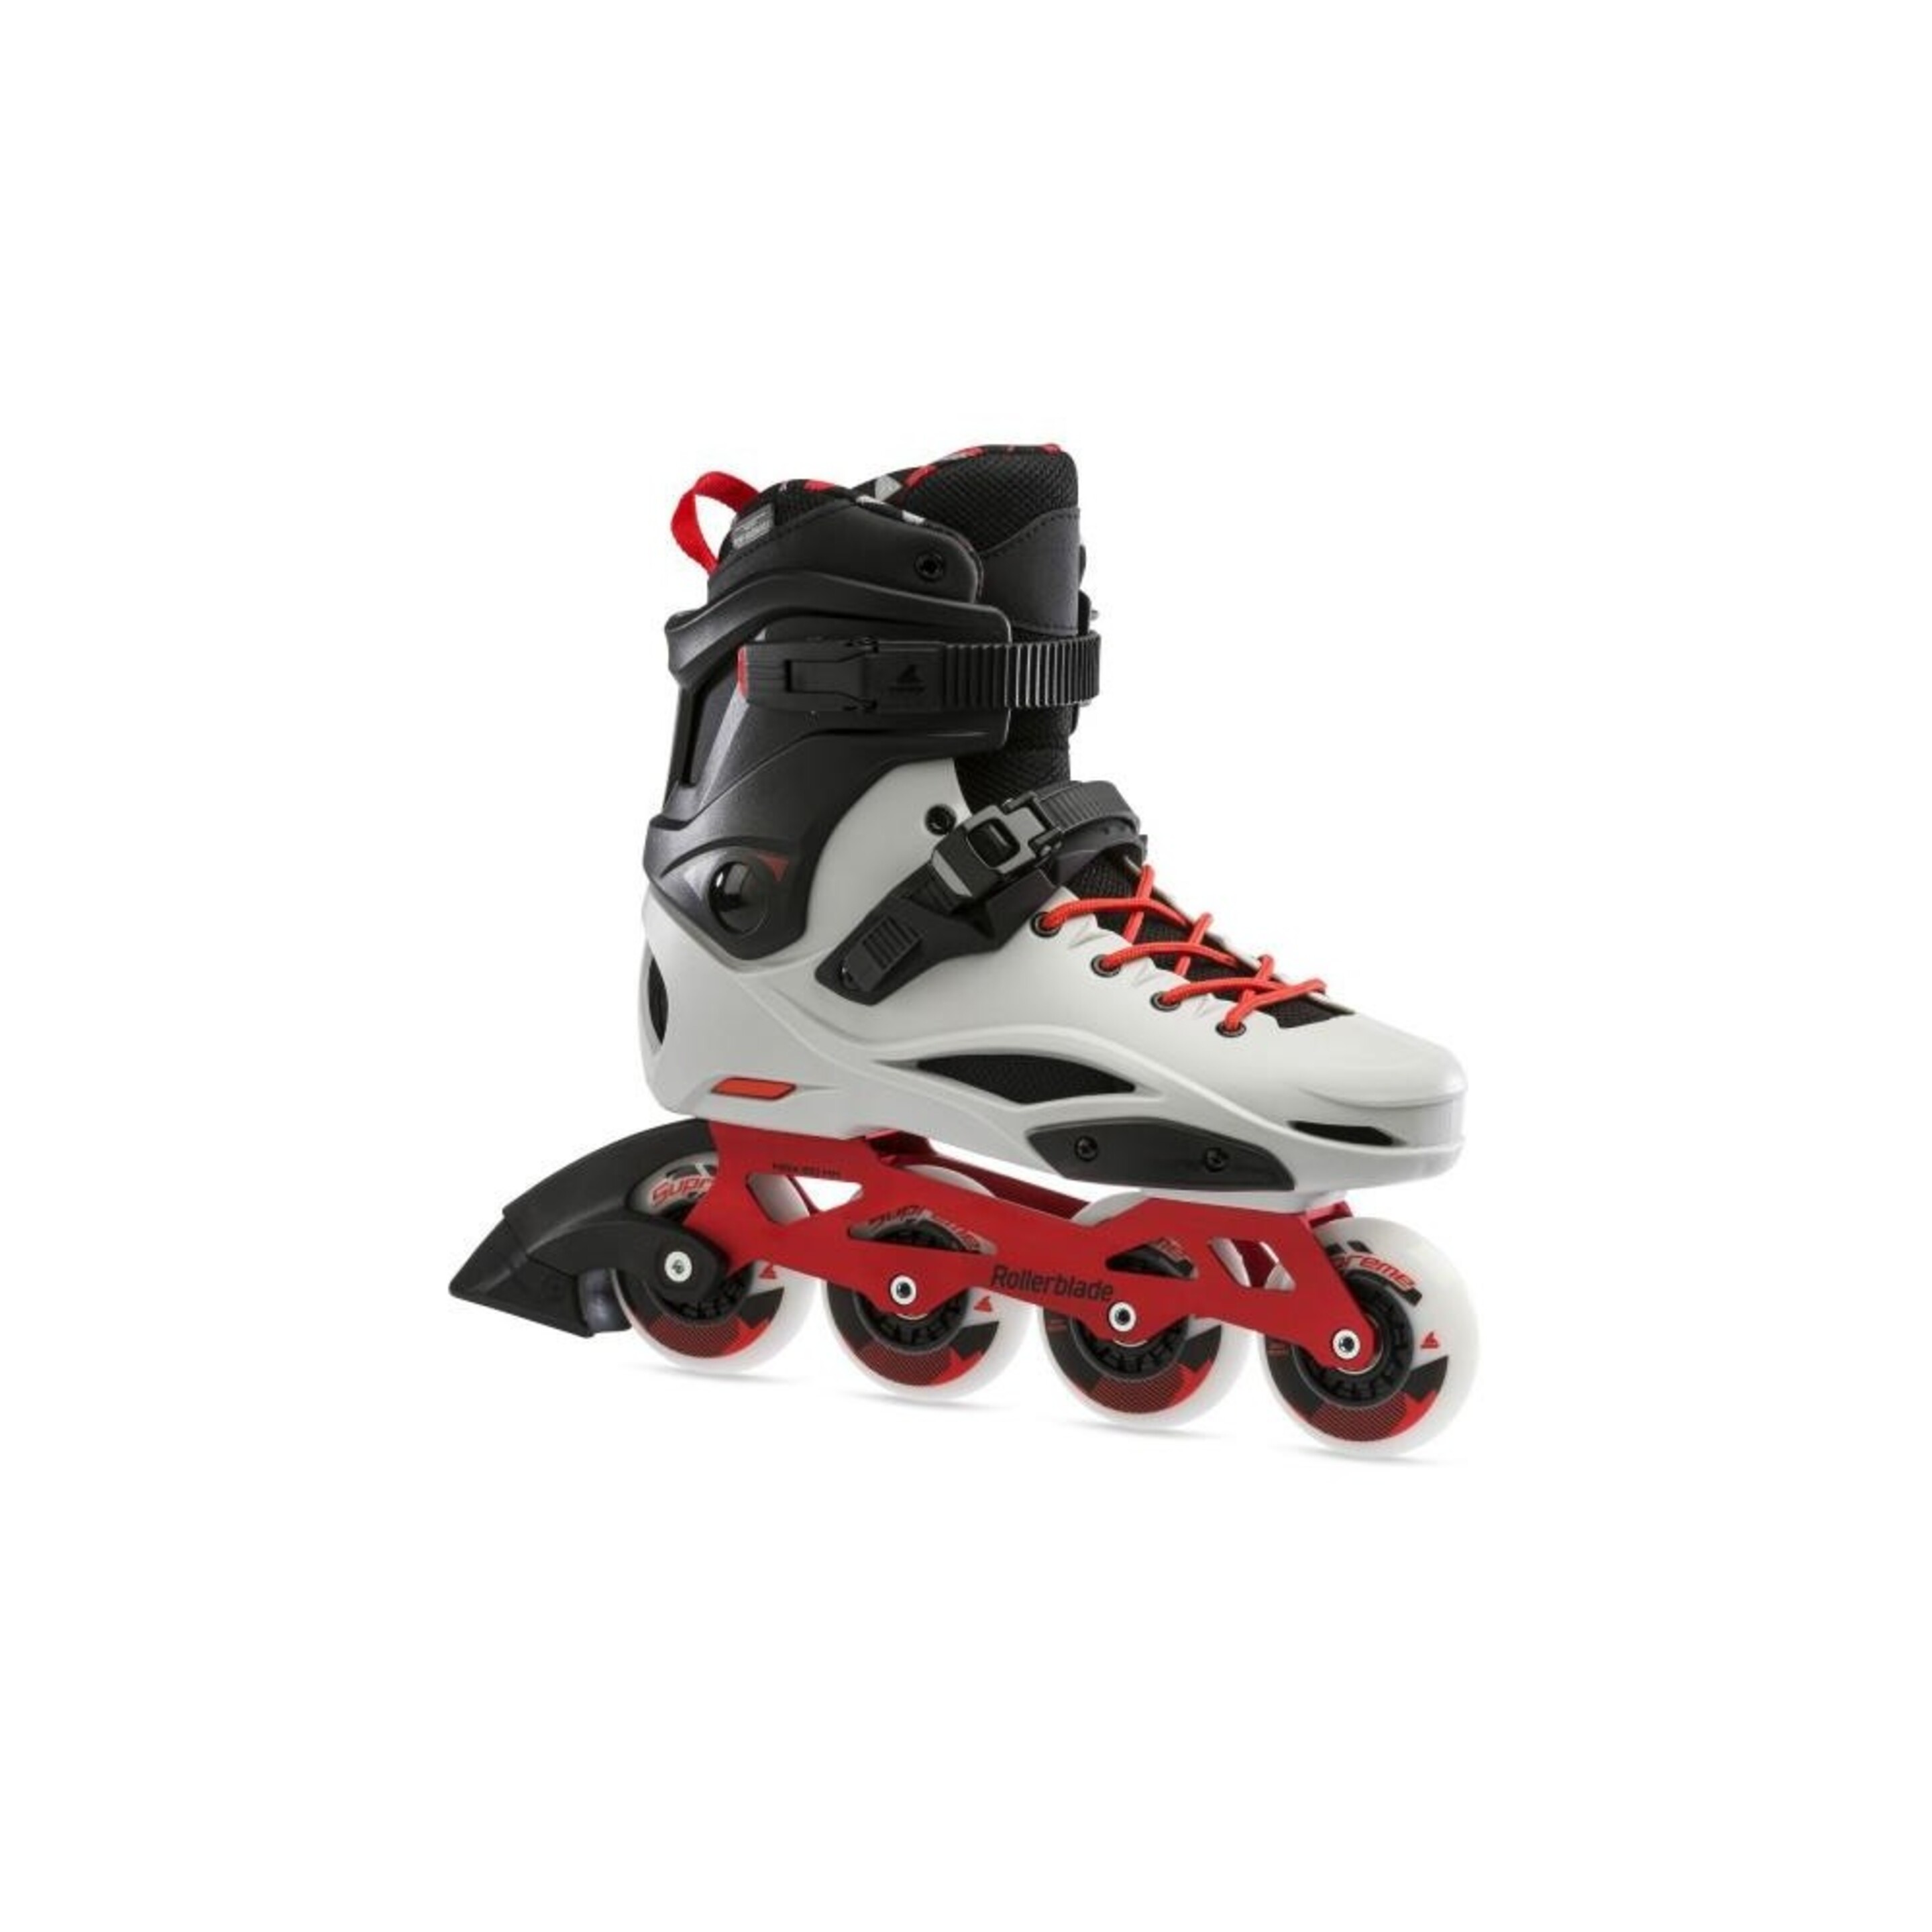 Patines Rollerblade Rb Pro X - gris-rojo - 